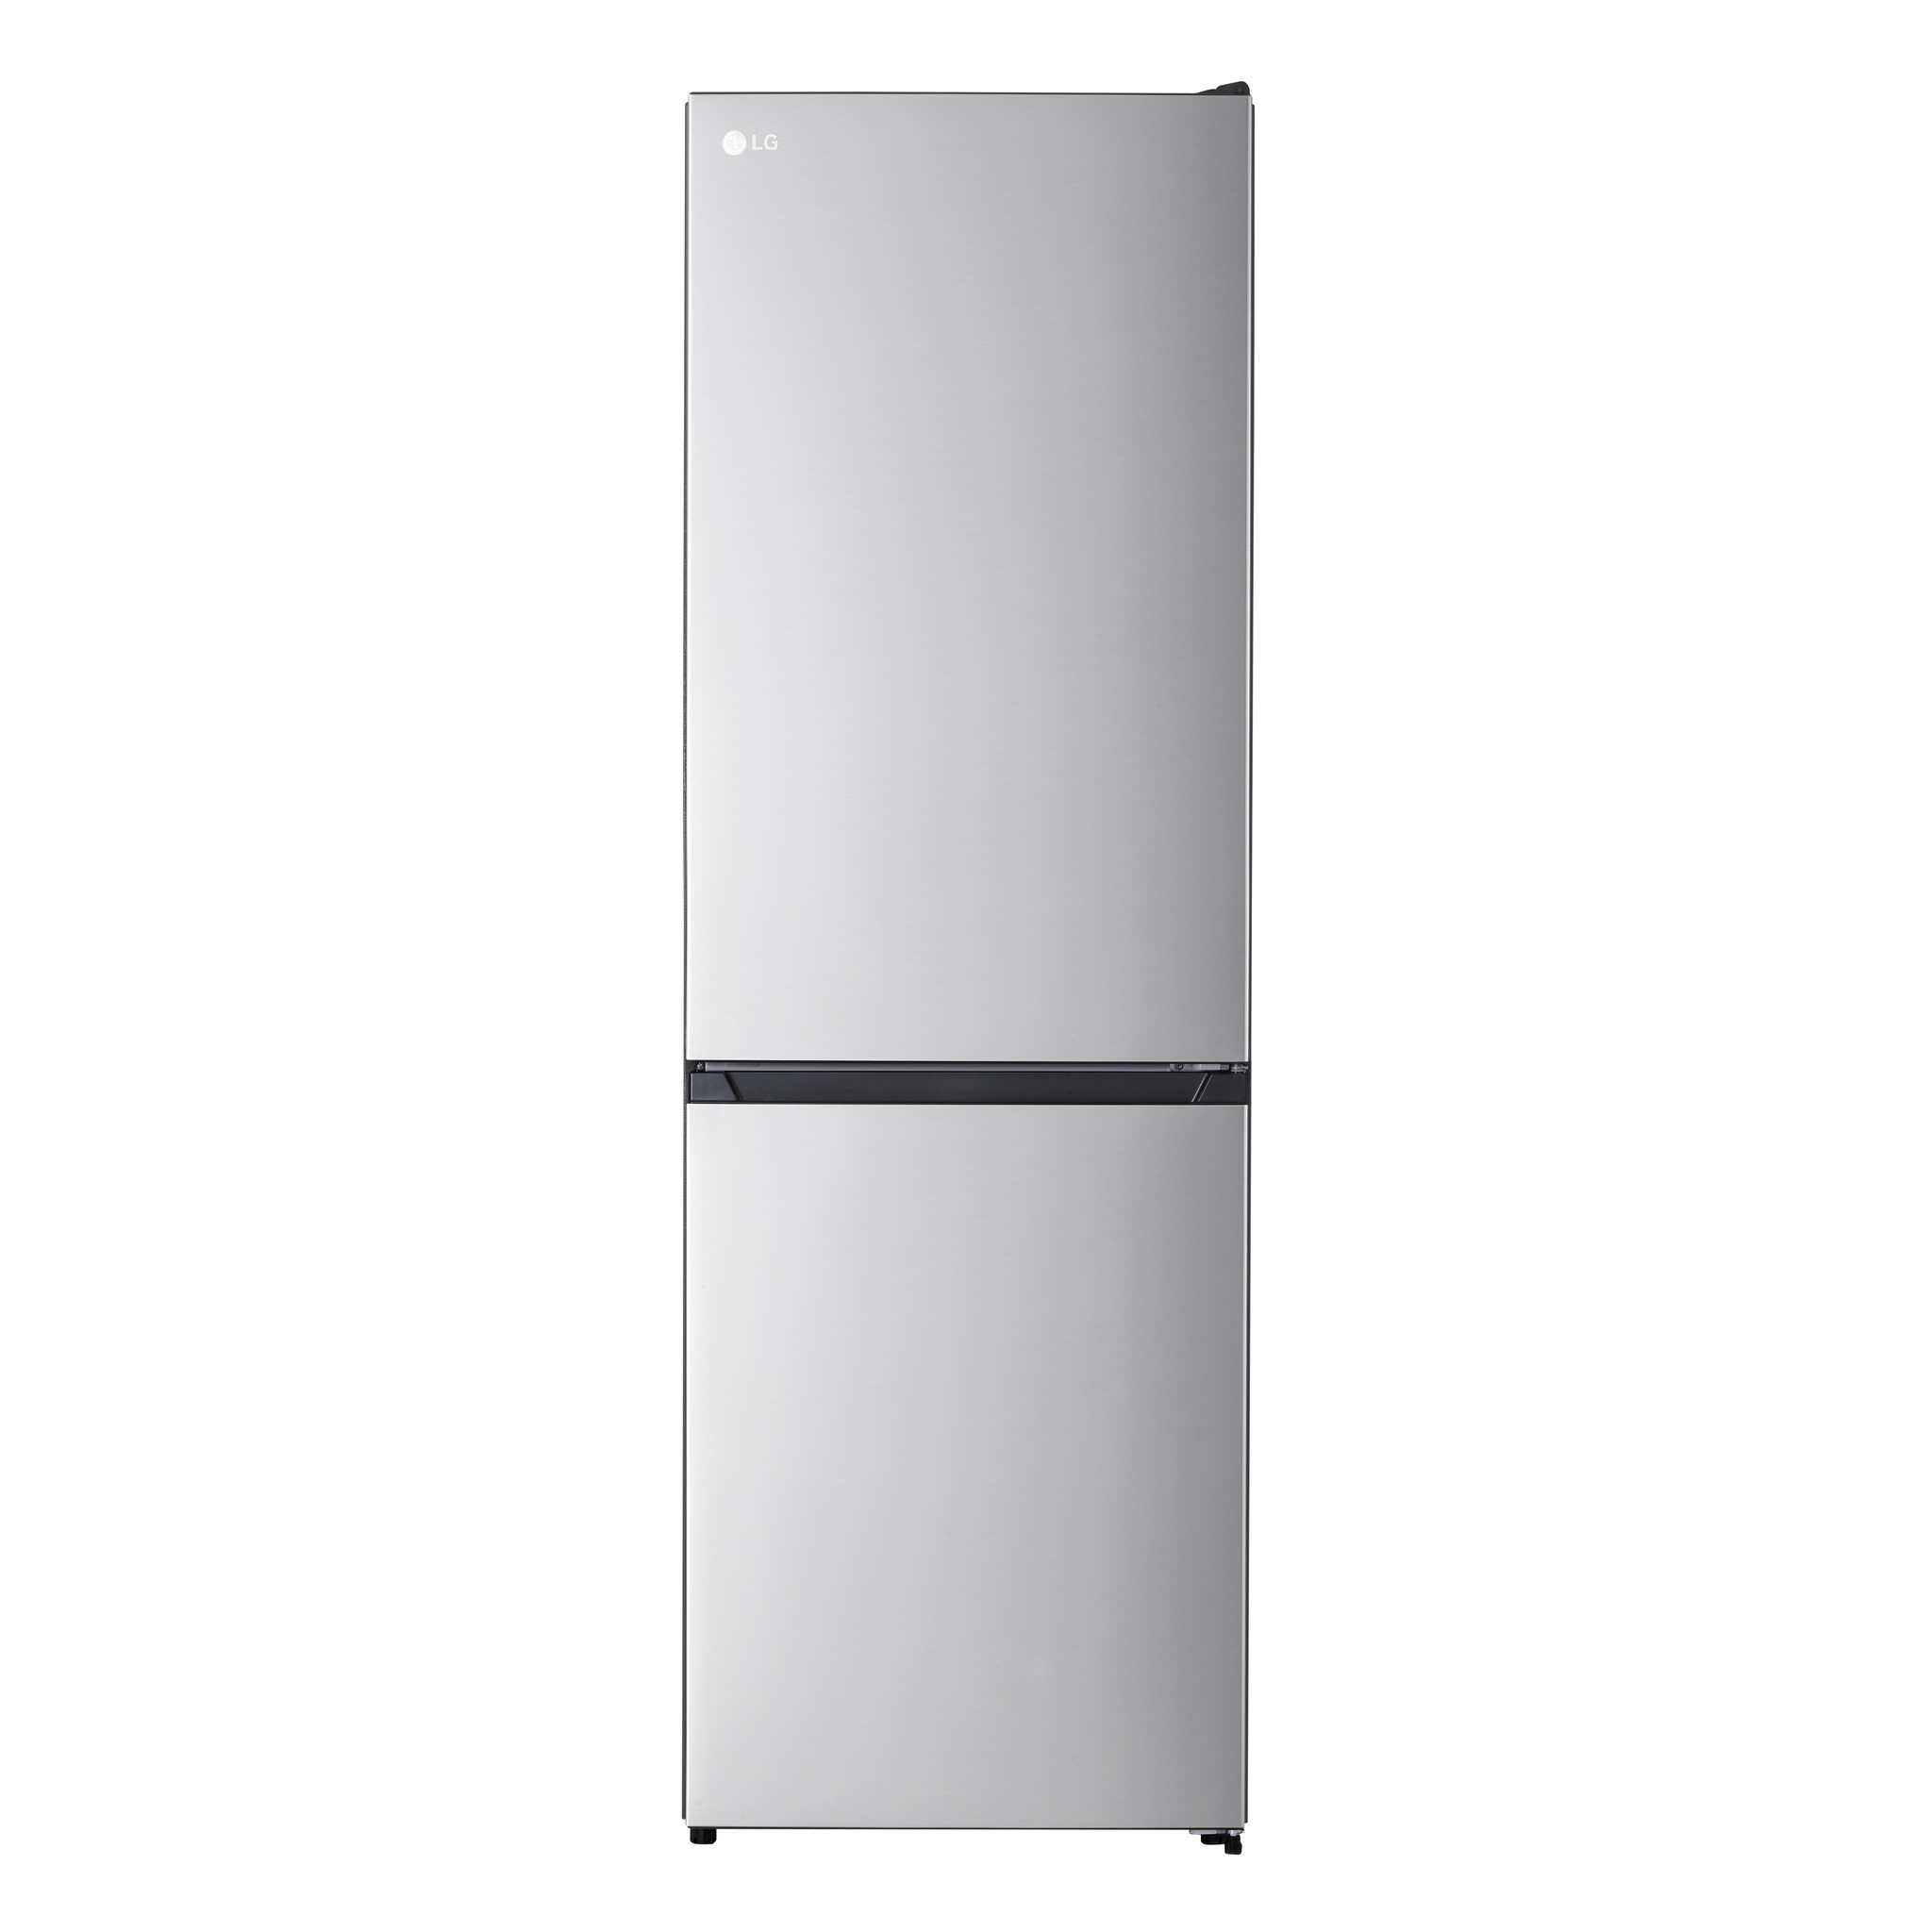 LG GBM21HSADH Total No Frost Fridge Freezer – Silver – D Rated #364836